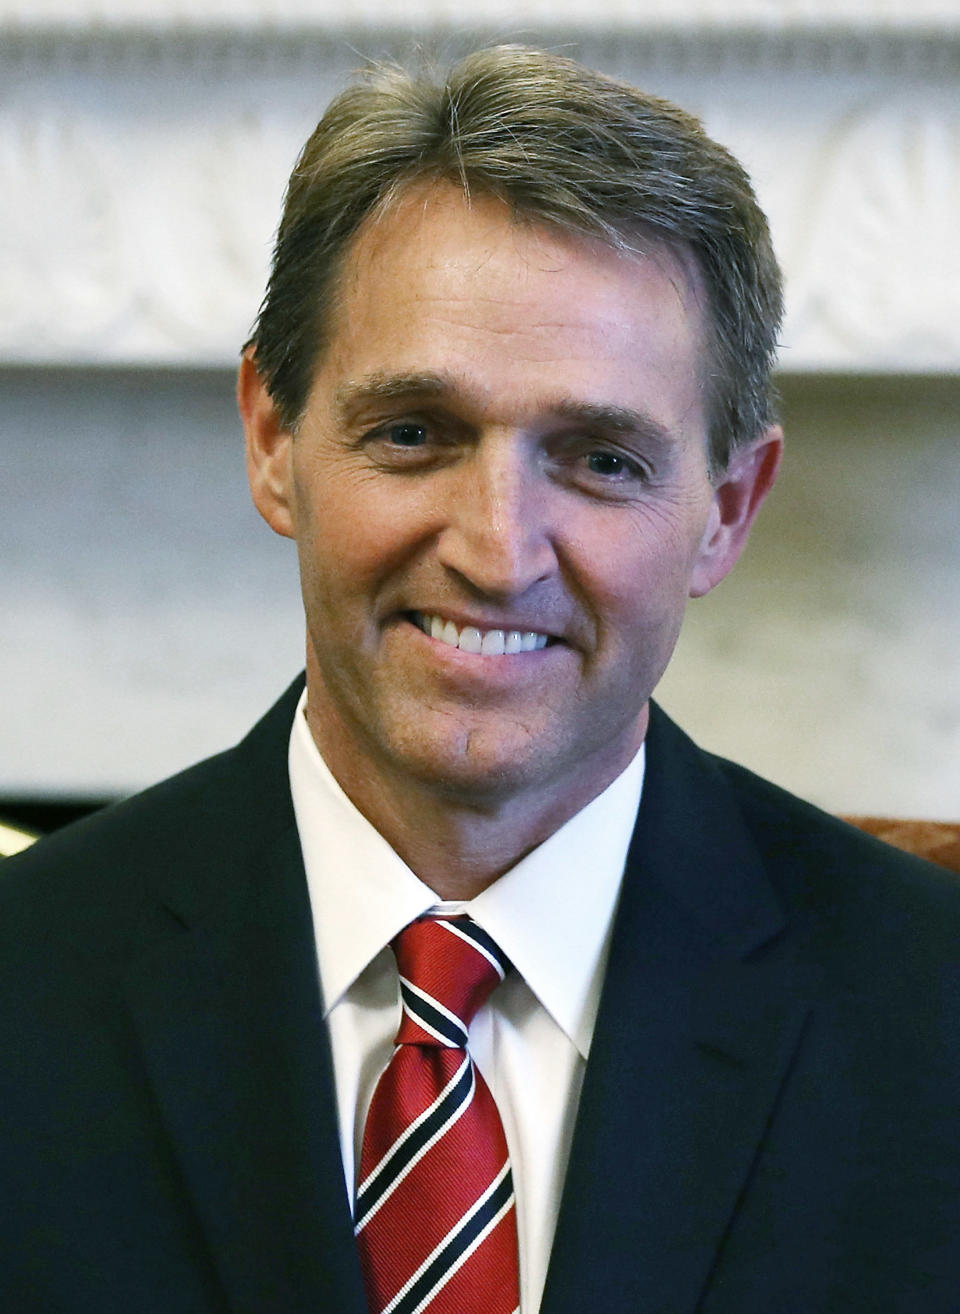 GOP senators-elect Jeff Flake (R-Ariz.), poses for a picture with Senate Minority Leader Mitch McConnell at the U.S. Capitol on November 13, 2012 in Washington, D.C. (Photo by Mark Wilson/Getty Images)